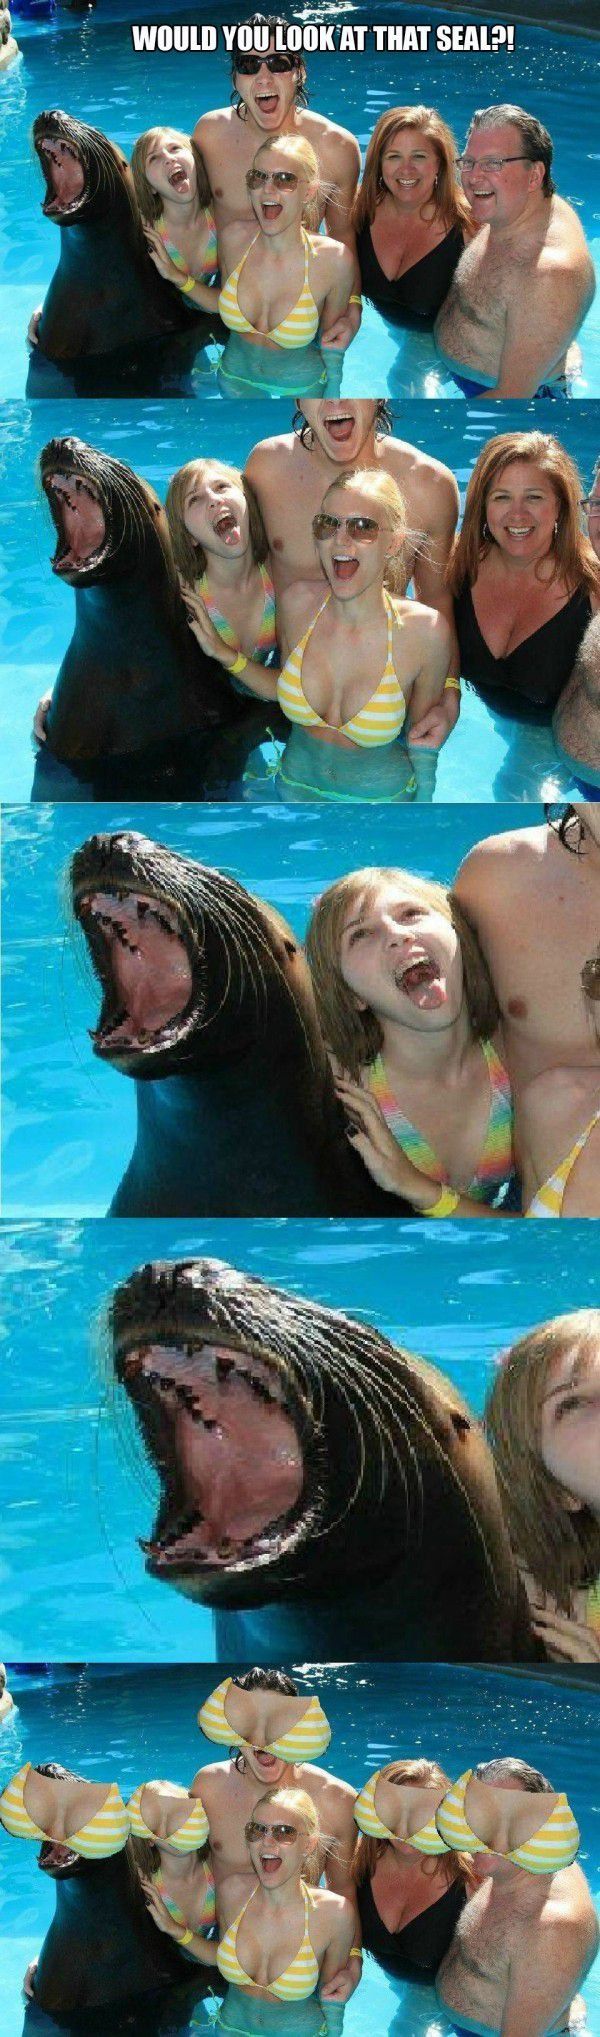 random seal facebomb - Would You Look At That Seal?!